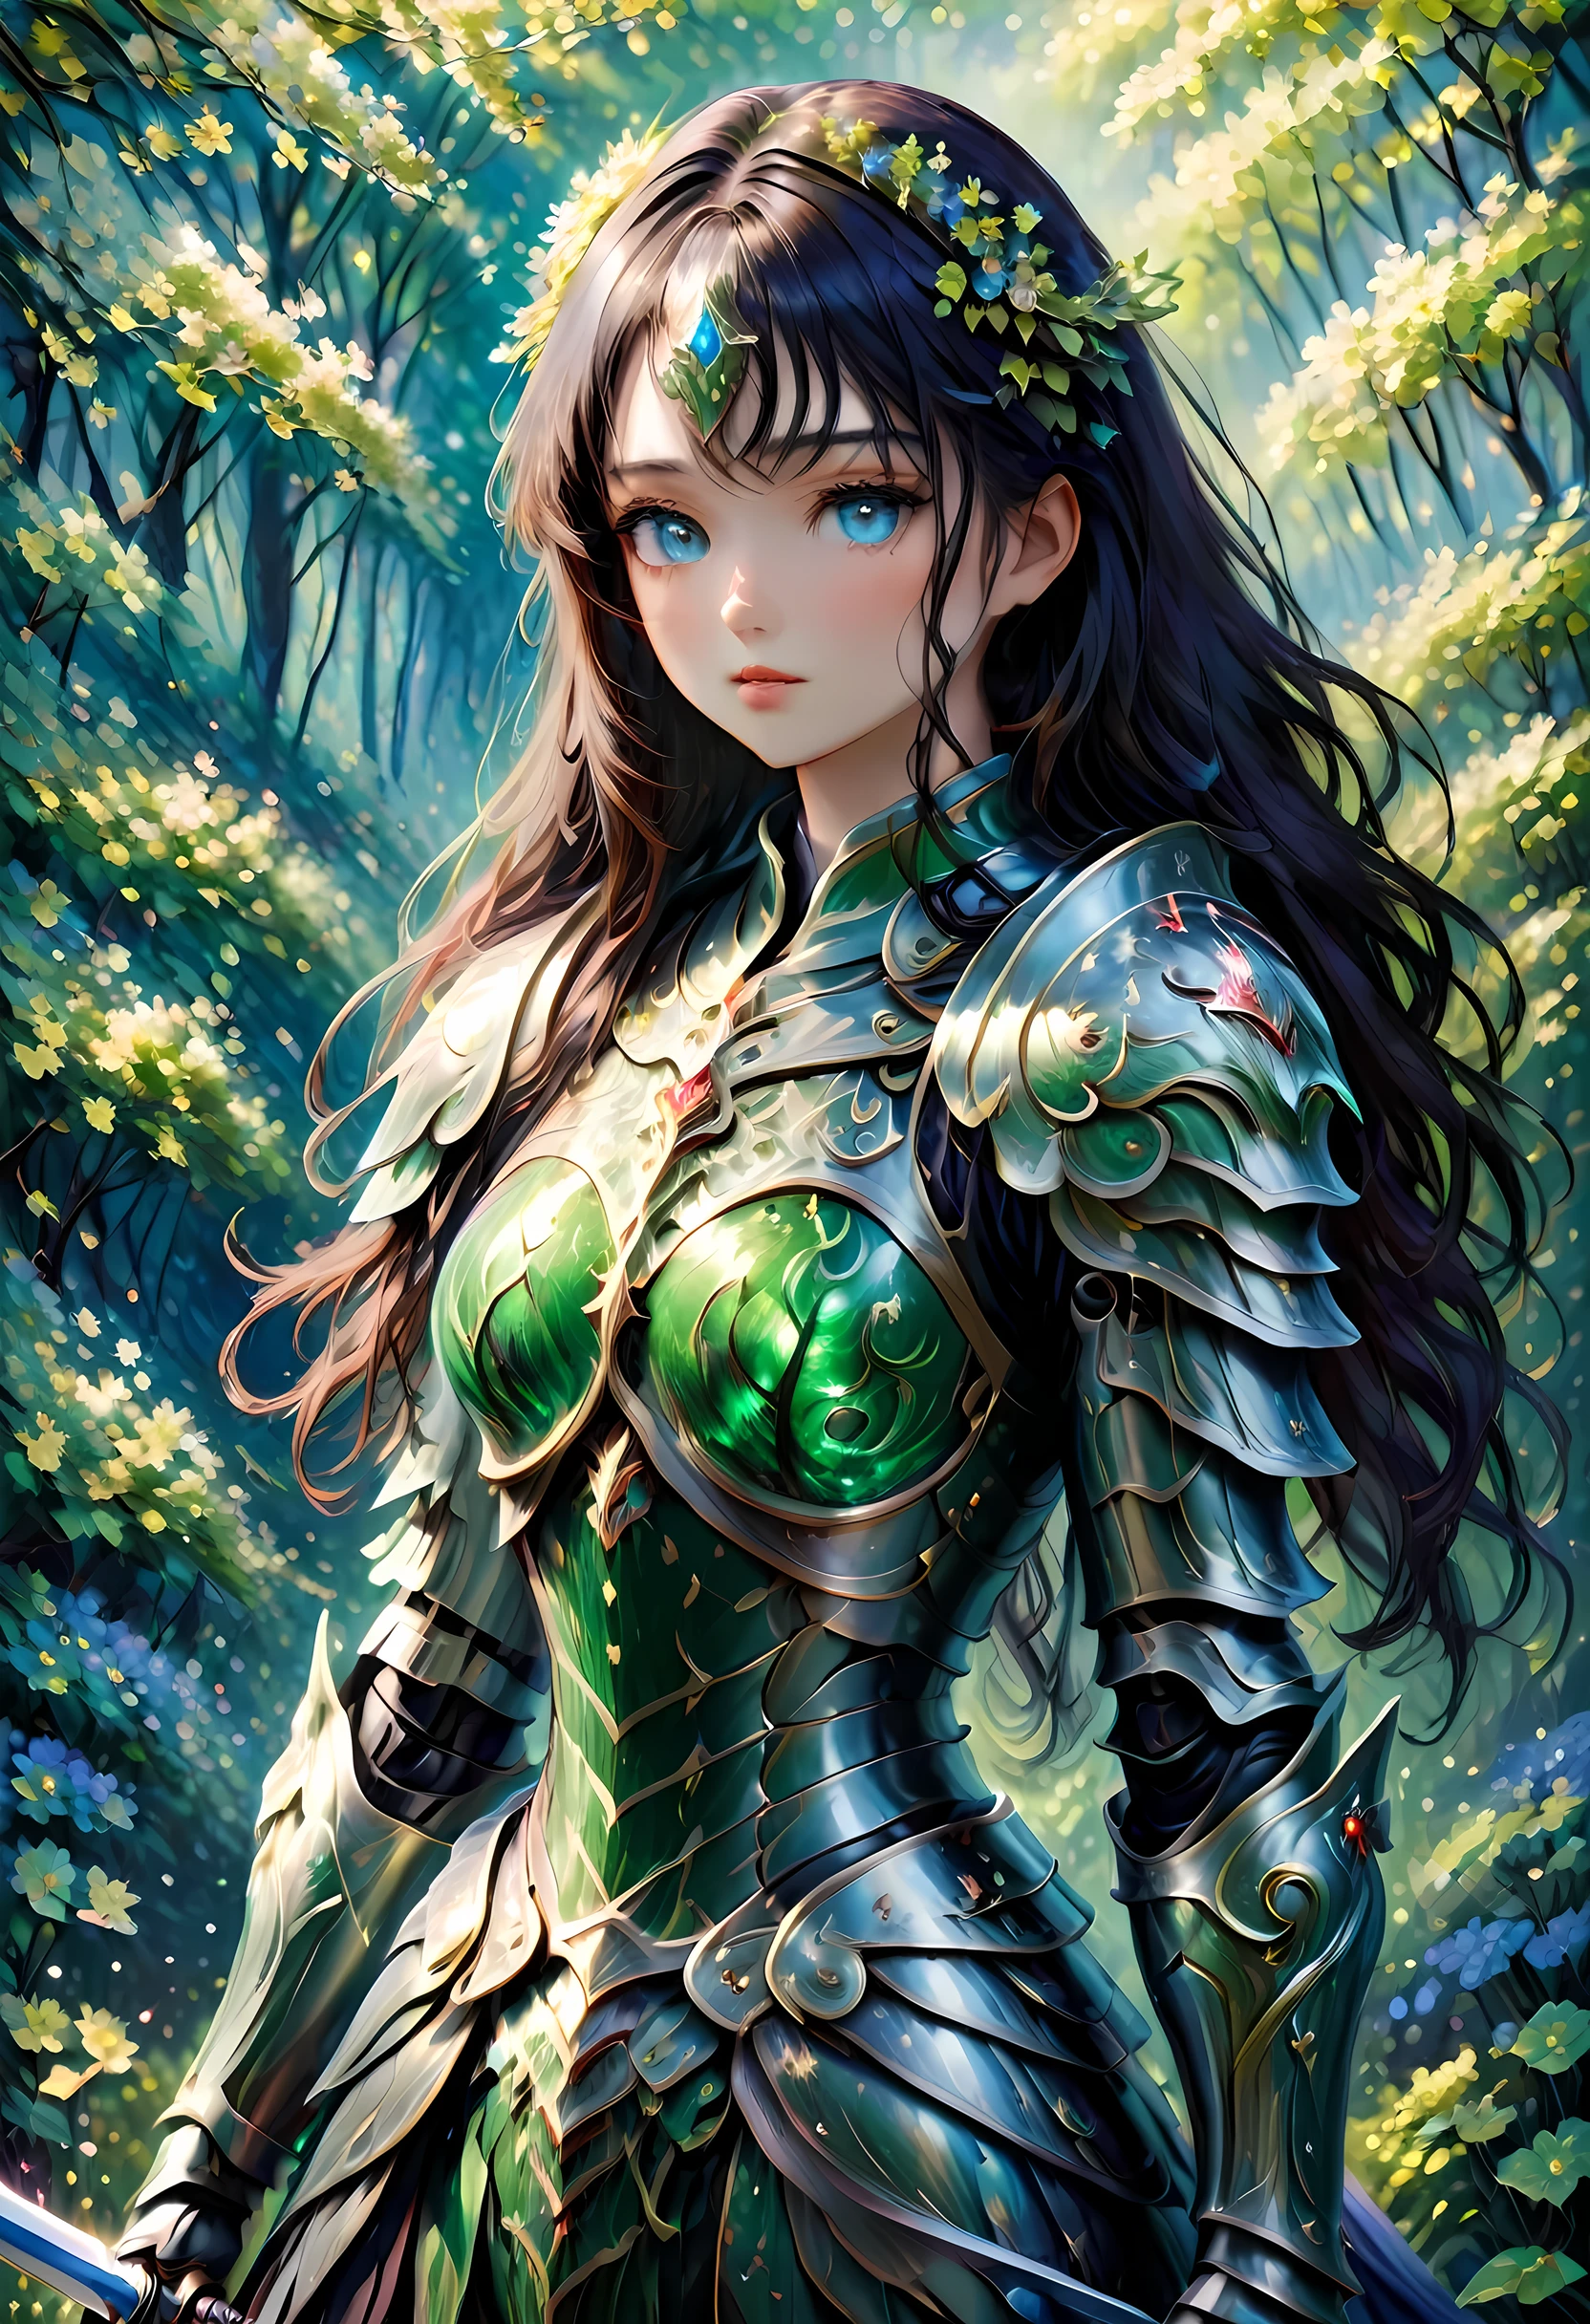 (Claude Monet Style:1.5) modisn disney, Claude_Monet style painting, a picture of woman paladin of nature protecting the forest, a woman knight, black hair, long hair, full body (best details, Masterpiece, best quality :1.5), ultra detailed face (best details, Masterpiece, best quality :1.5), ultra feminine (best details, Masterpiece, best quality :1.5), black hair, long hair, braided hair, pale skin, (deep blue: 1.2) eyes, intense eyes, wearying heavy armor, white armor (best details, Masterpiece, best quality :1.5), green cloak, armed with a sword, glowing sword GlowingRunes_green, fantasy forest background, D&D art, RPG art, magical atmosphere magic-fantasy-forest, ultra best realistic, best details, best quality, 16k, [ultra detailed], masterpiece, best quality, (extremely detailed), ultra wide shot, photorealism, depth of field, hyper realistic painting, cybrk, RagingNebula
